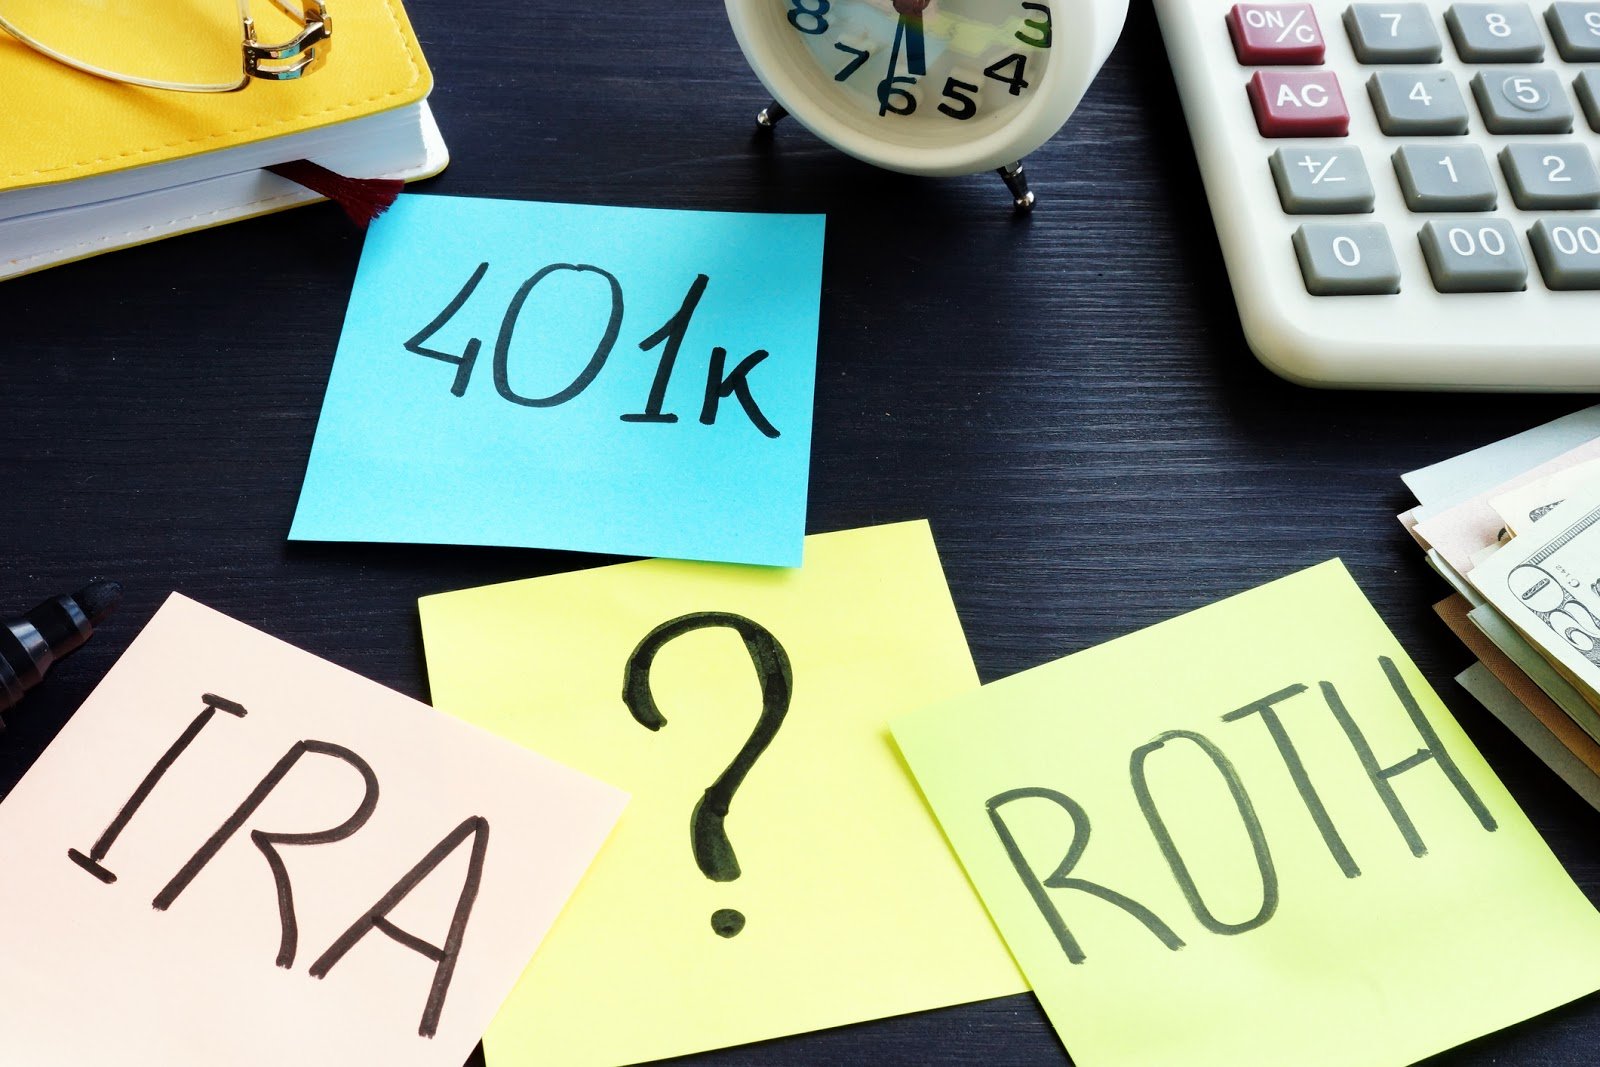 Should I Convert My Retirement Account to a Roth IRA?